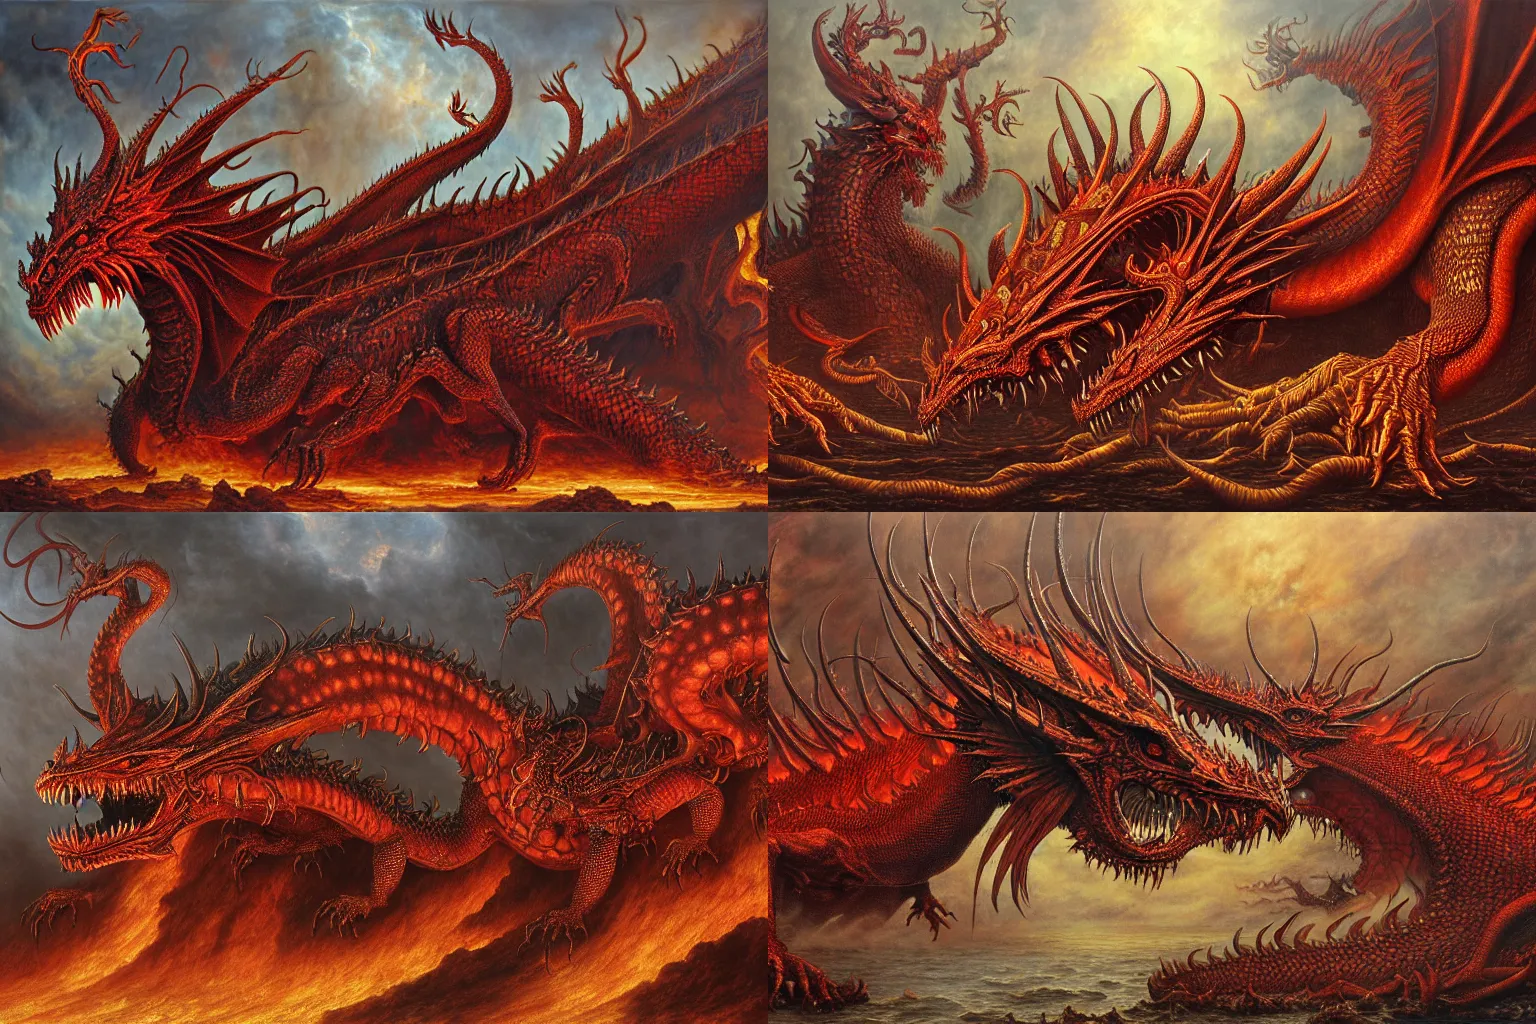 Prompt: a crowned 7-headed, 10-horned great fiery red dragon, detailed, intricate, matte painting by Mariusz Lewandowski, Giger and Jacek Yerka